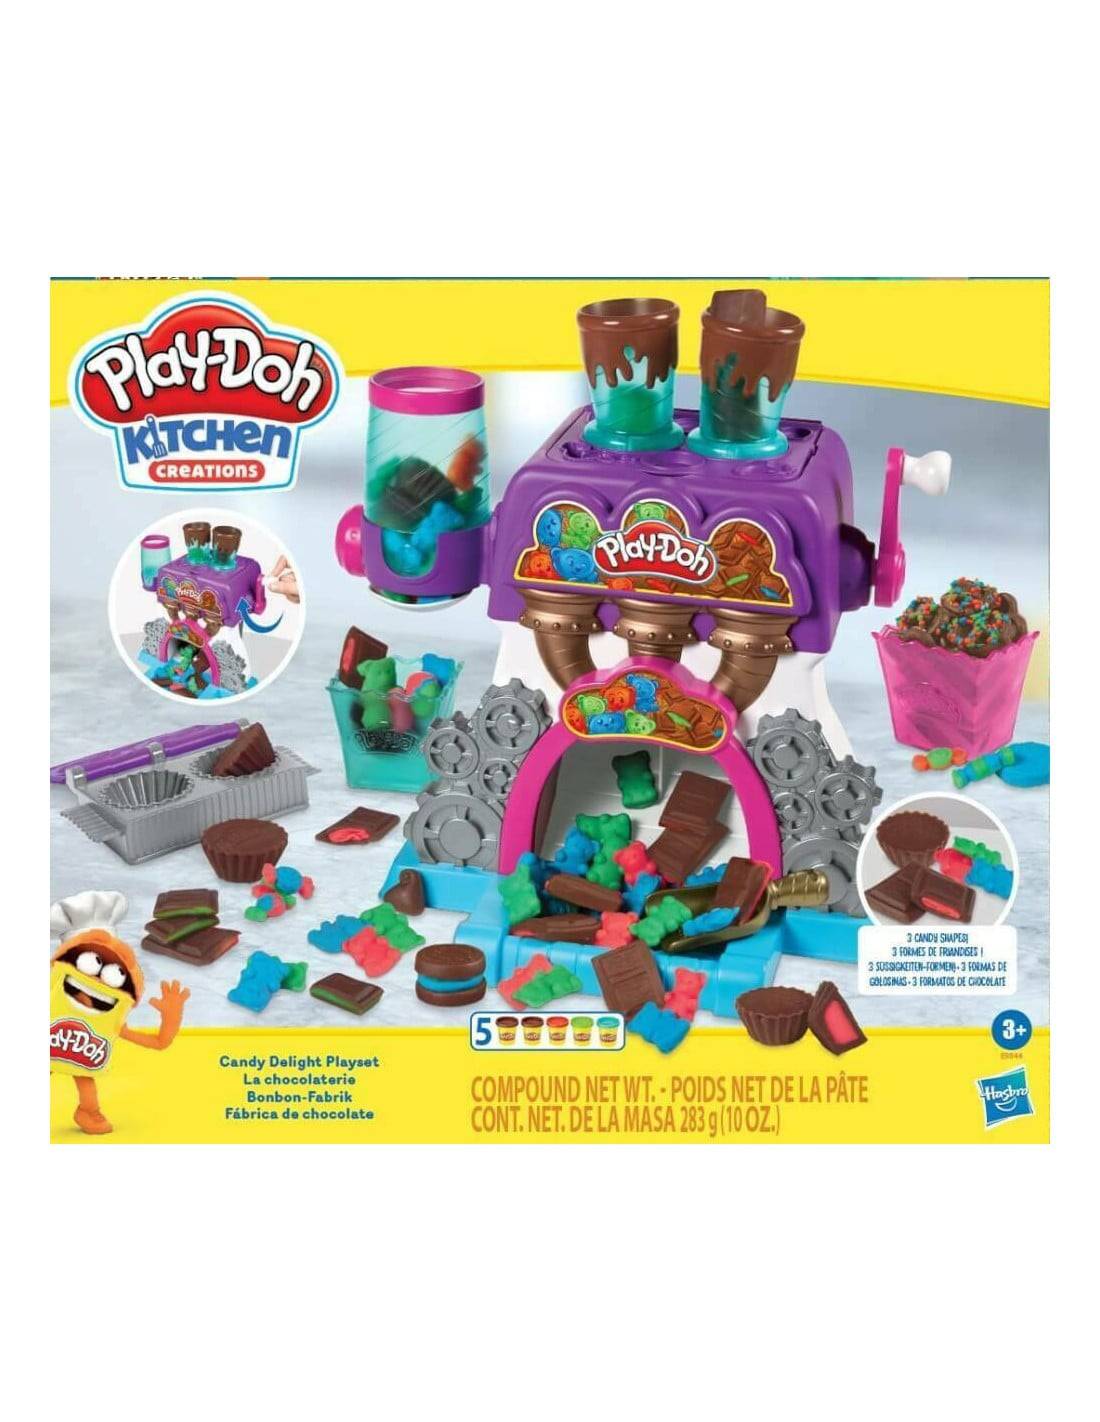 Playdoh Kitchen Creations Candy Delight Playset - Albagame